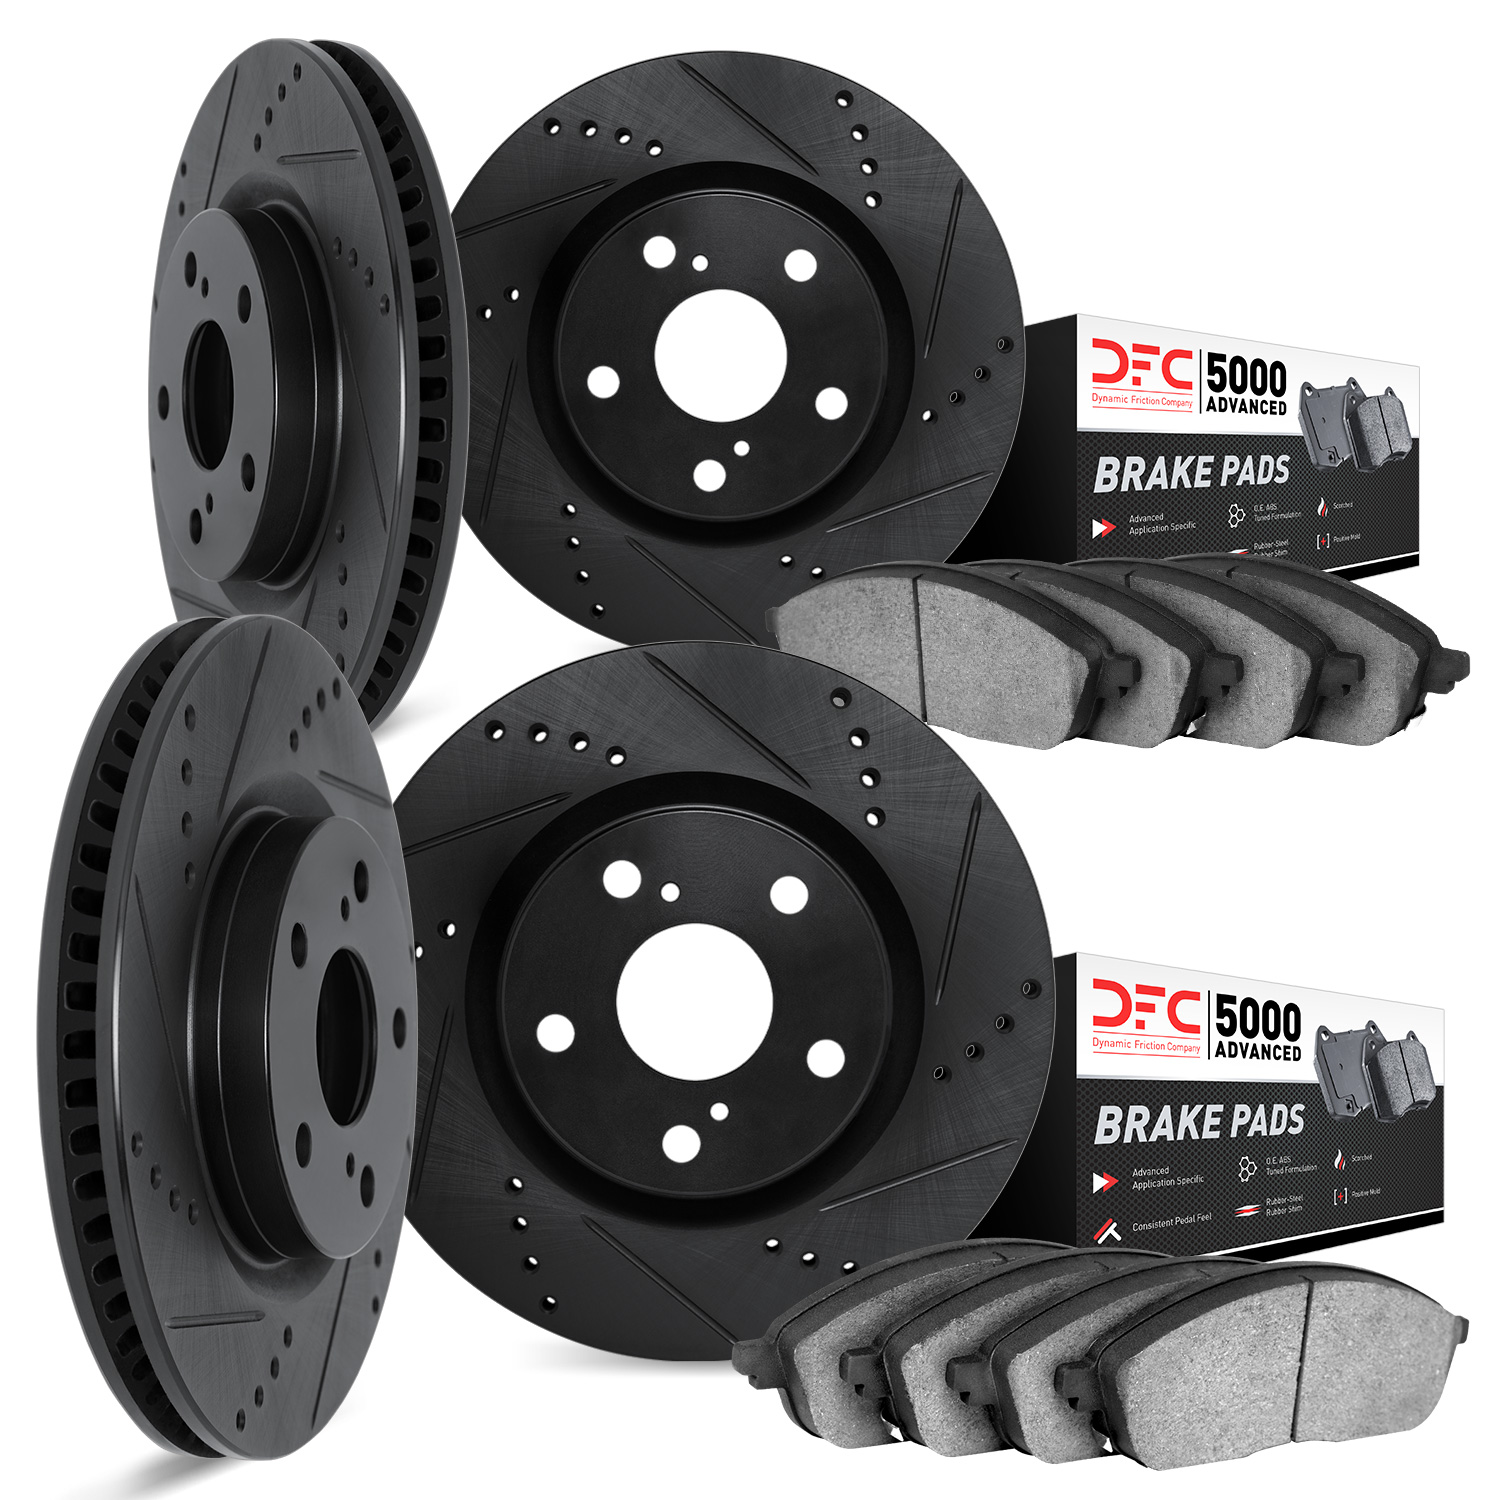 8504-02018 Drilled/Slotted Brake Rotors w/5000 Advanced Brake Pads Kit [Black], 2008-2008 Porsche, Position: Front and Rear